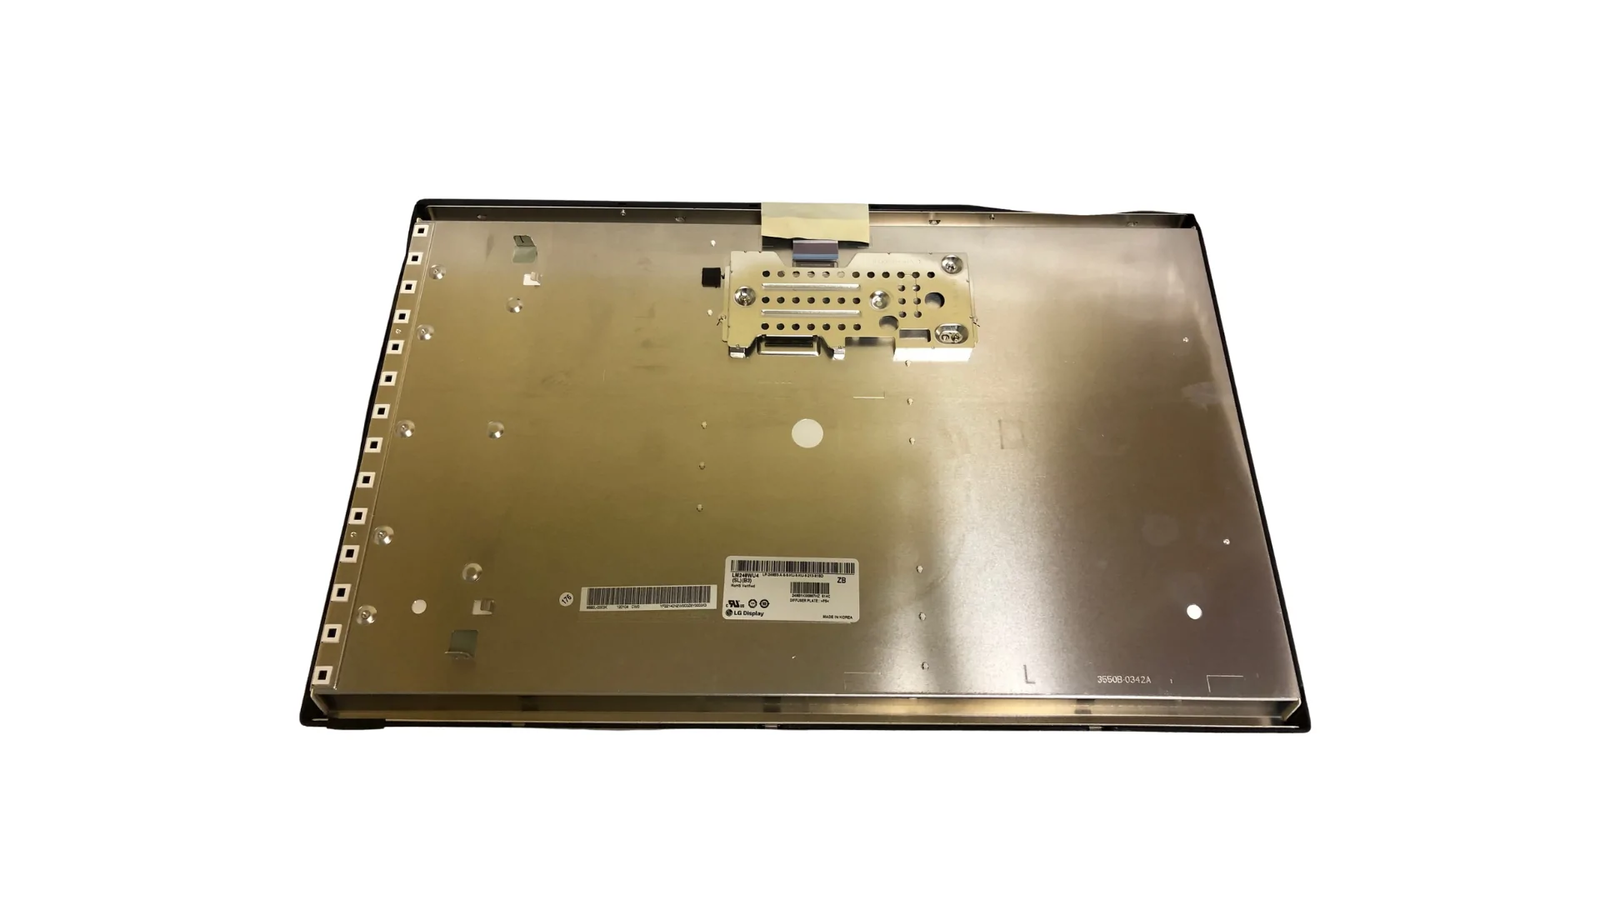 LM240WU4 display for Dell U2410f - FOR PARTS